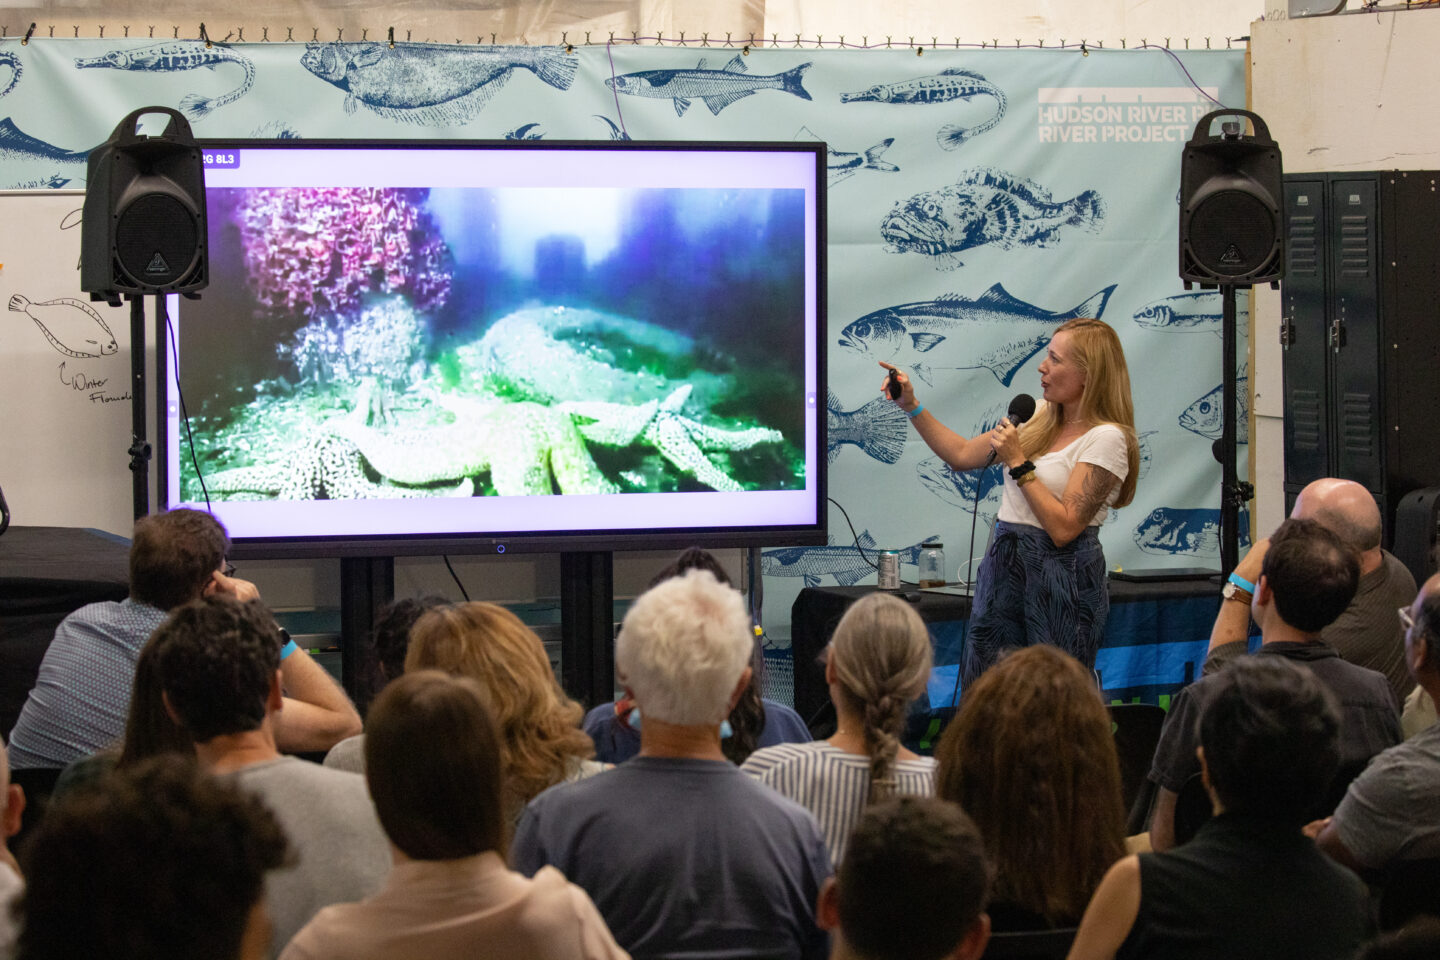 A scientist giving a presentation to an audience using a digital screen, as part of Hudson River Park's Ask a Scientist event series